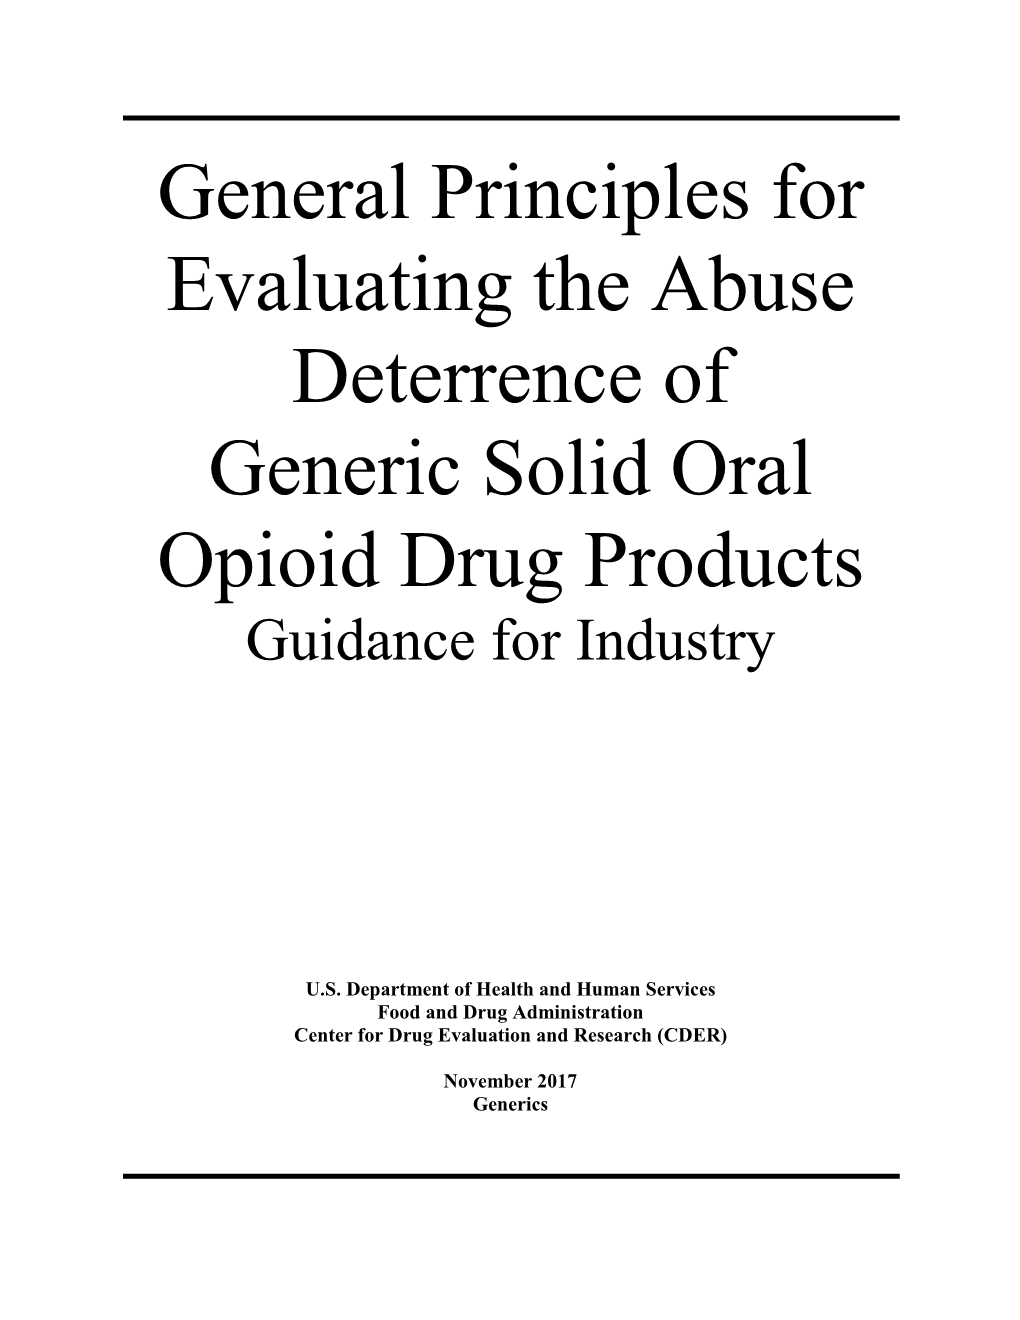 Guidance for Industry: General Principles for Evaluating the Abuse Deterrence of Generic Solid Oral Opioid Drug